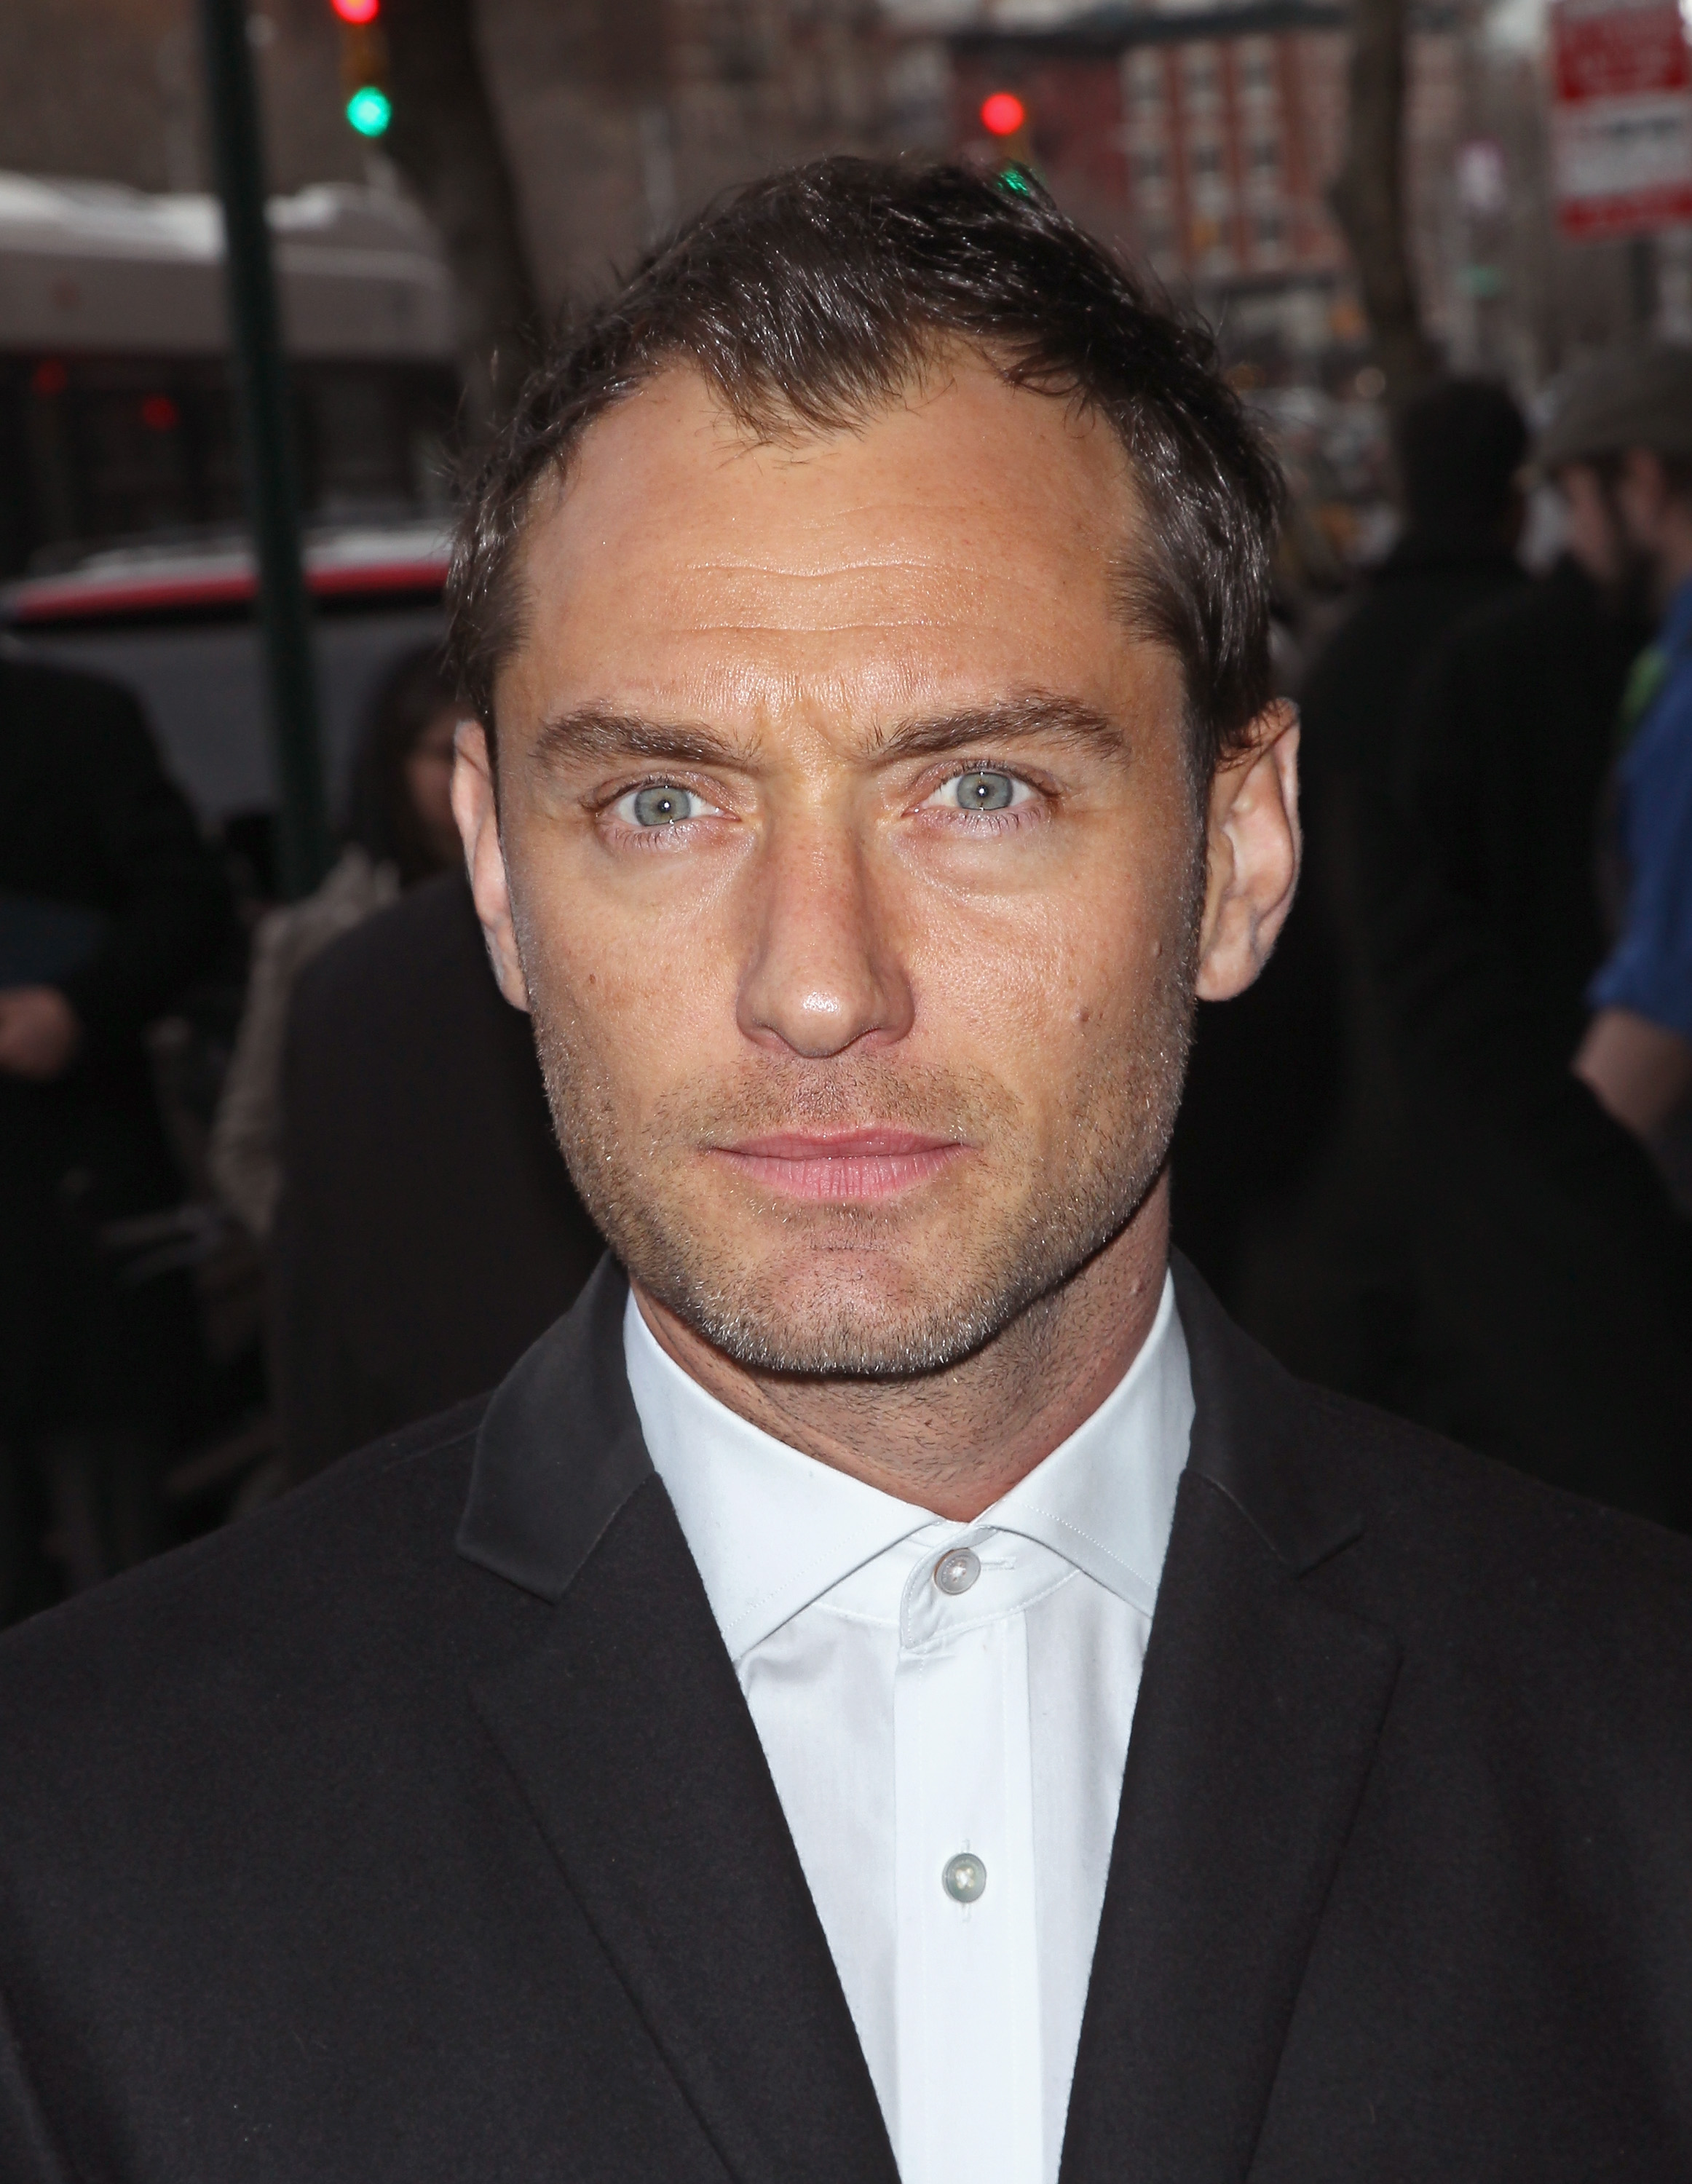 Jude Law at the Fox Searchlight Pictures' "Dom Hemingway" screening hosted by The Cinema Society And Links Of London on March 27, 2014, in New York City. | Source: Getty Images